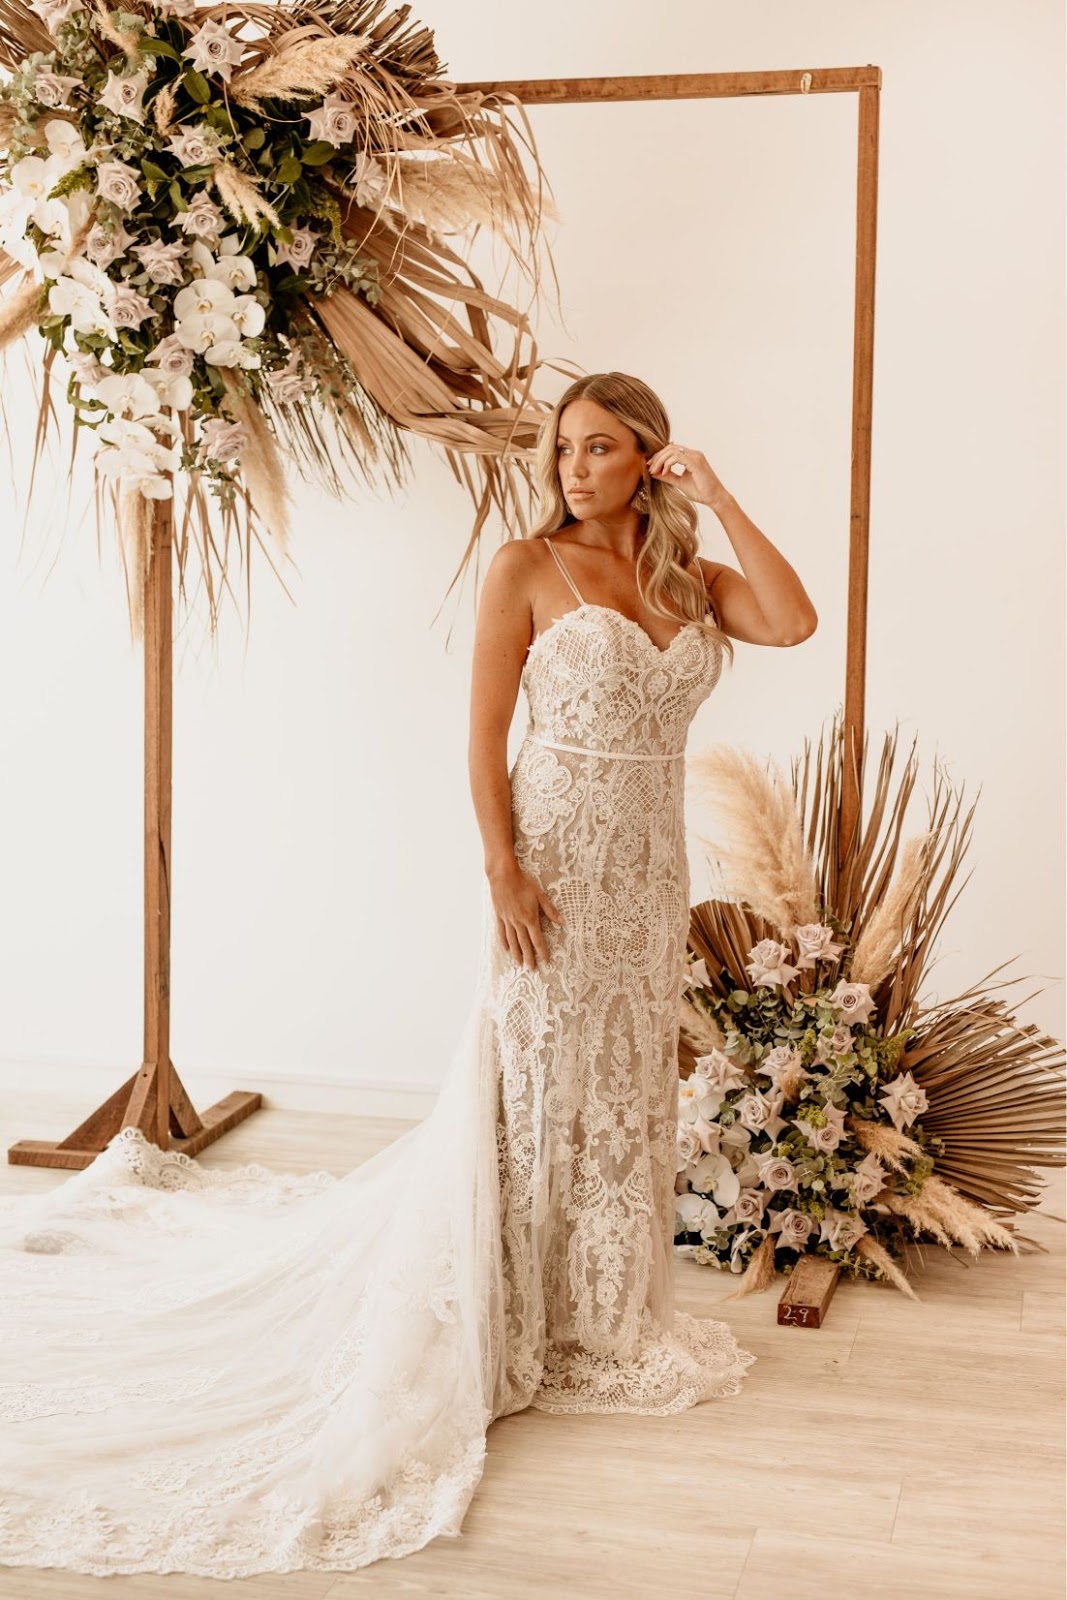 DANIELLE WEBSTER PHOTOGRAPHY BRIDAL WEAR GOLD COAST FLORALS BRIDAL GOWNS